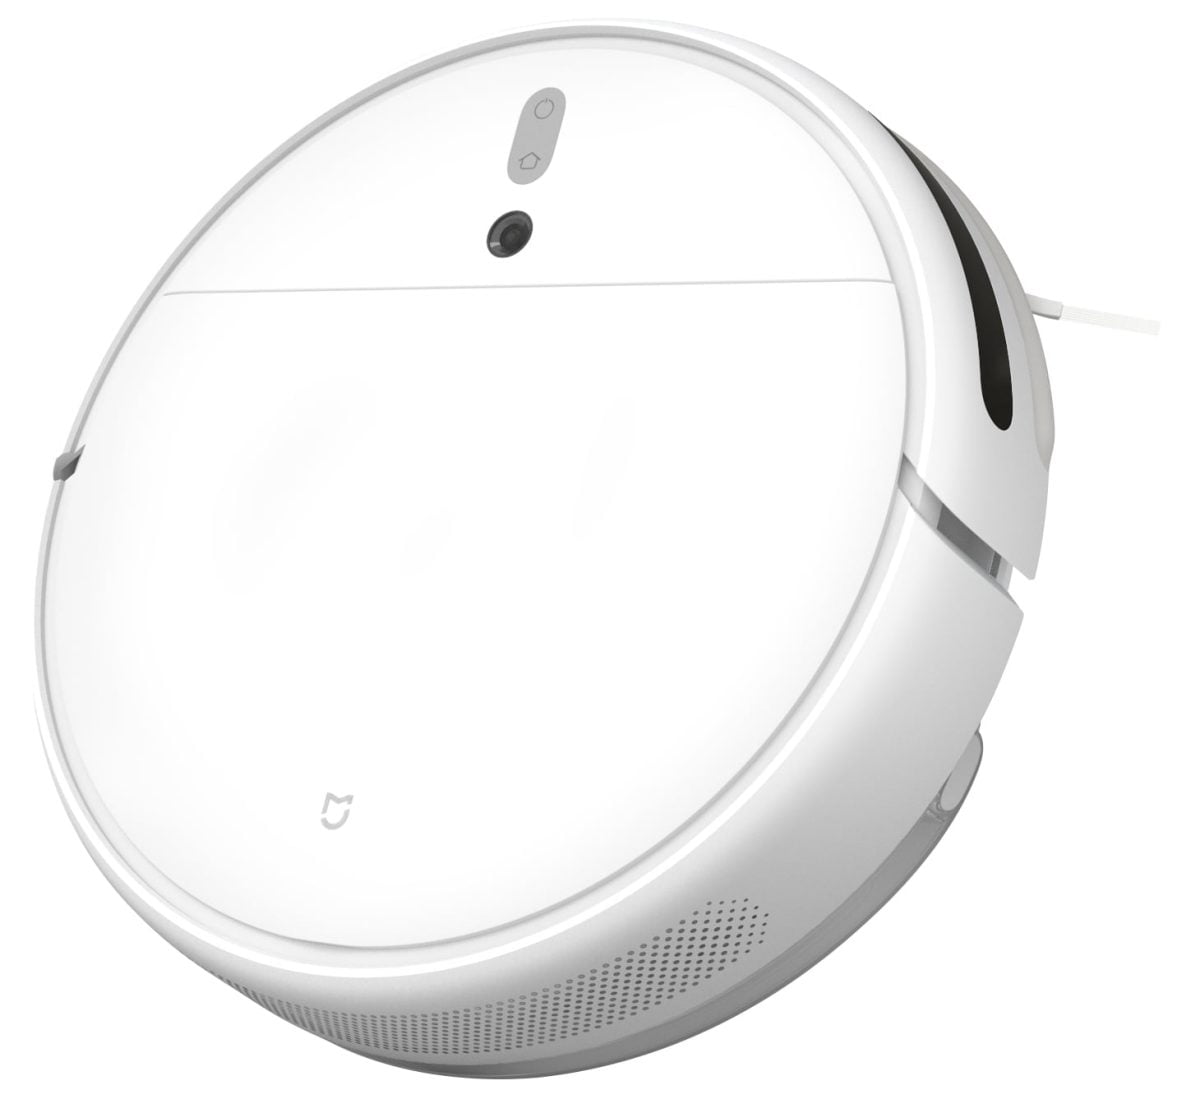 175597873 Origpic 723342 Xiaomi &Lt;Div Id=&Quot;Product-Description-Short-979&Quot; Class=&Quot;Product-Description-Short&Quot;&Gt; Unique Robotic Vacuum Cleaner For A Great Price, Wet And Dry Cleaning, Wi-Fi Connection, Vslam Route Planning, Suction Power Up To 2500 Pa, Application Control, Hepa Filter And Much More. Https://Youtu.be/Ychdmp-Pa7O &Lt;/Div&Gt; Xiaomi Mi Robot Vacuum-Mop Xiaomi Mi Robot Vacuum-Mop